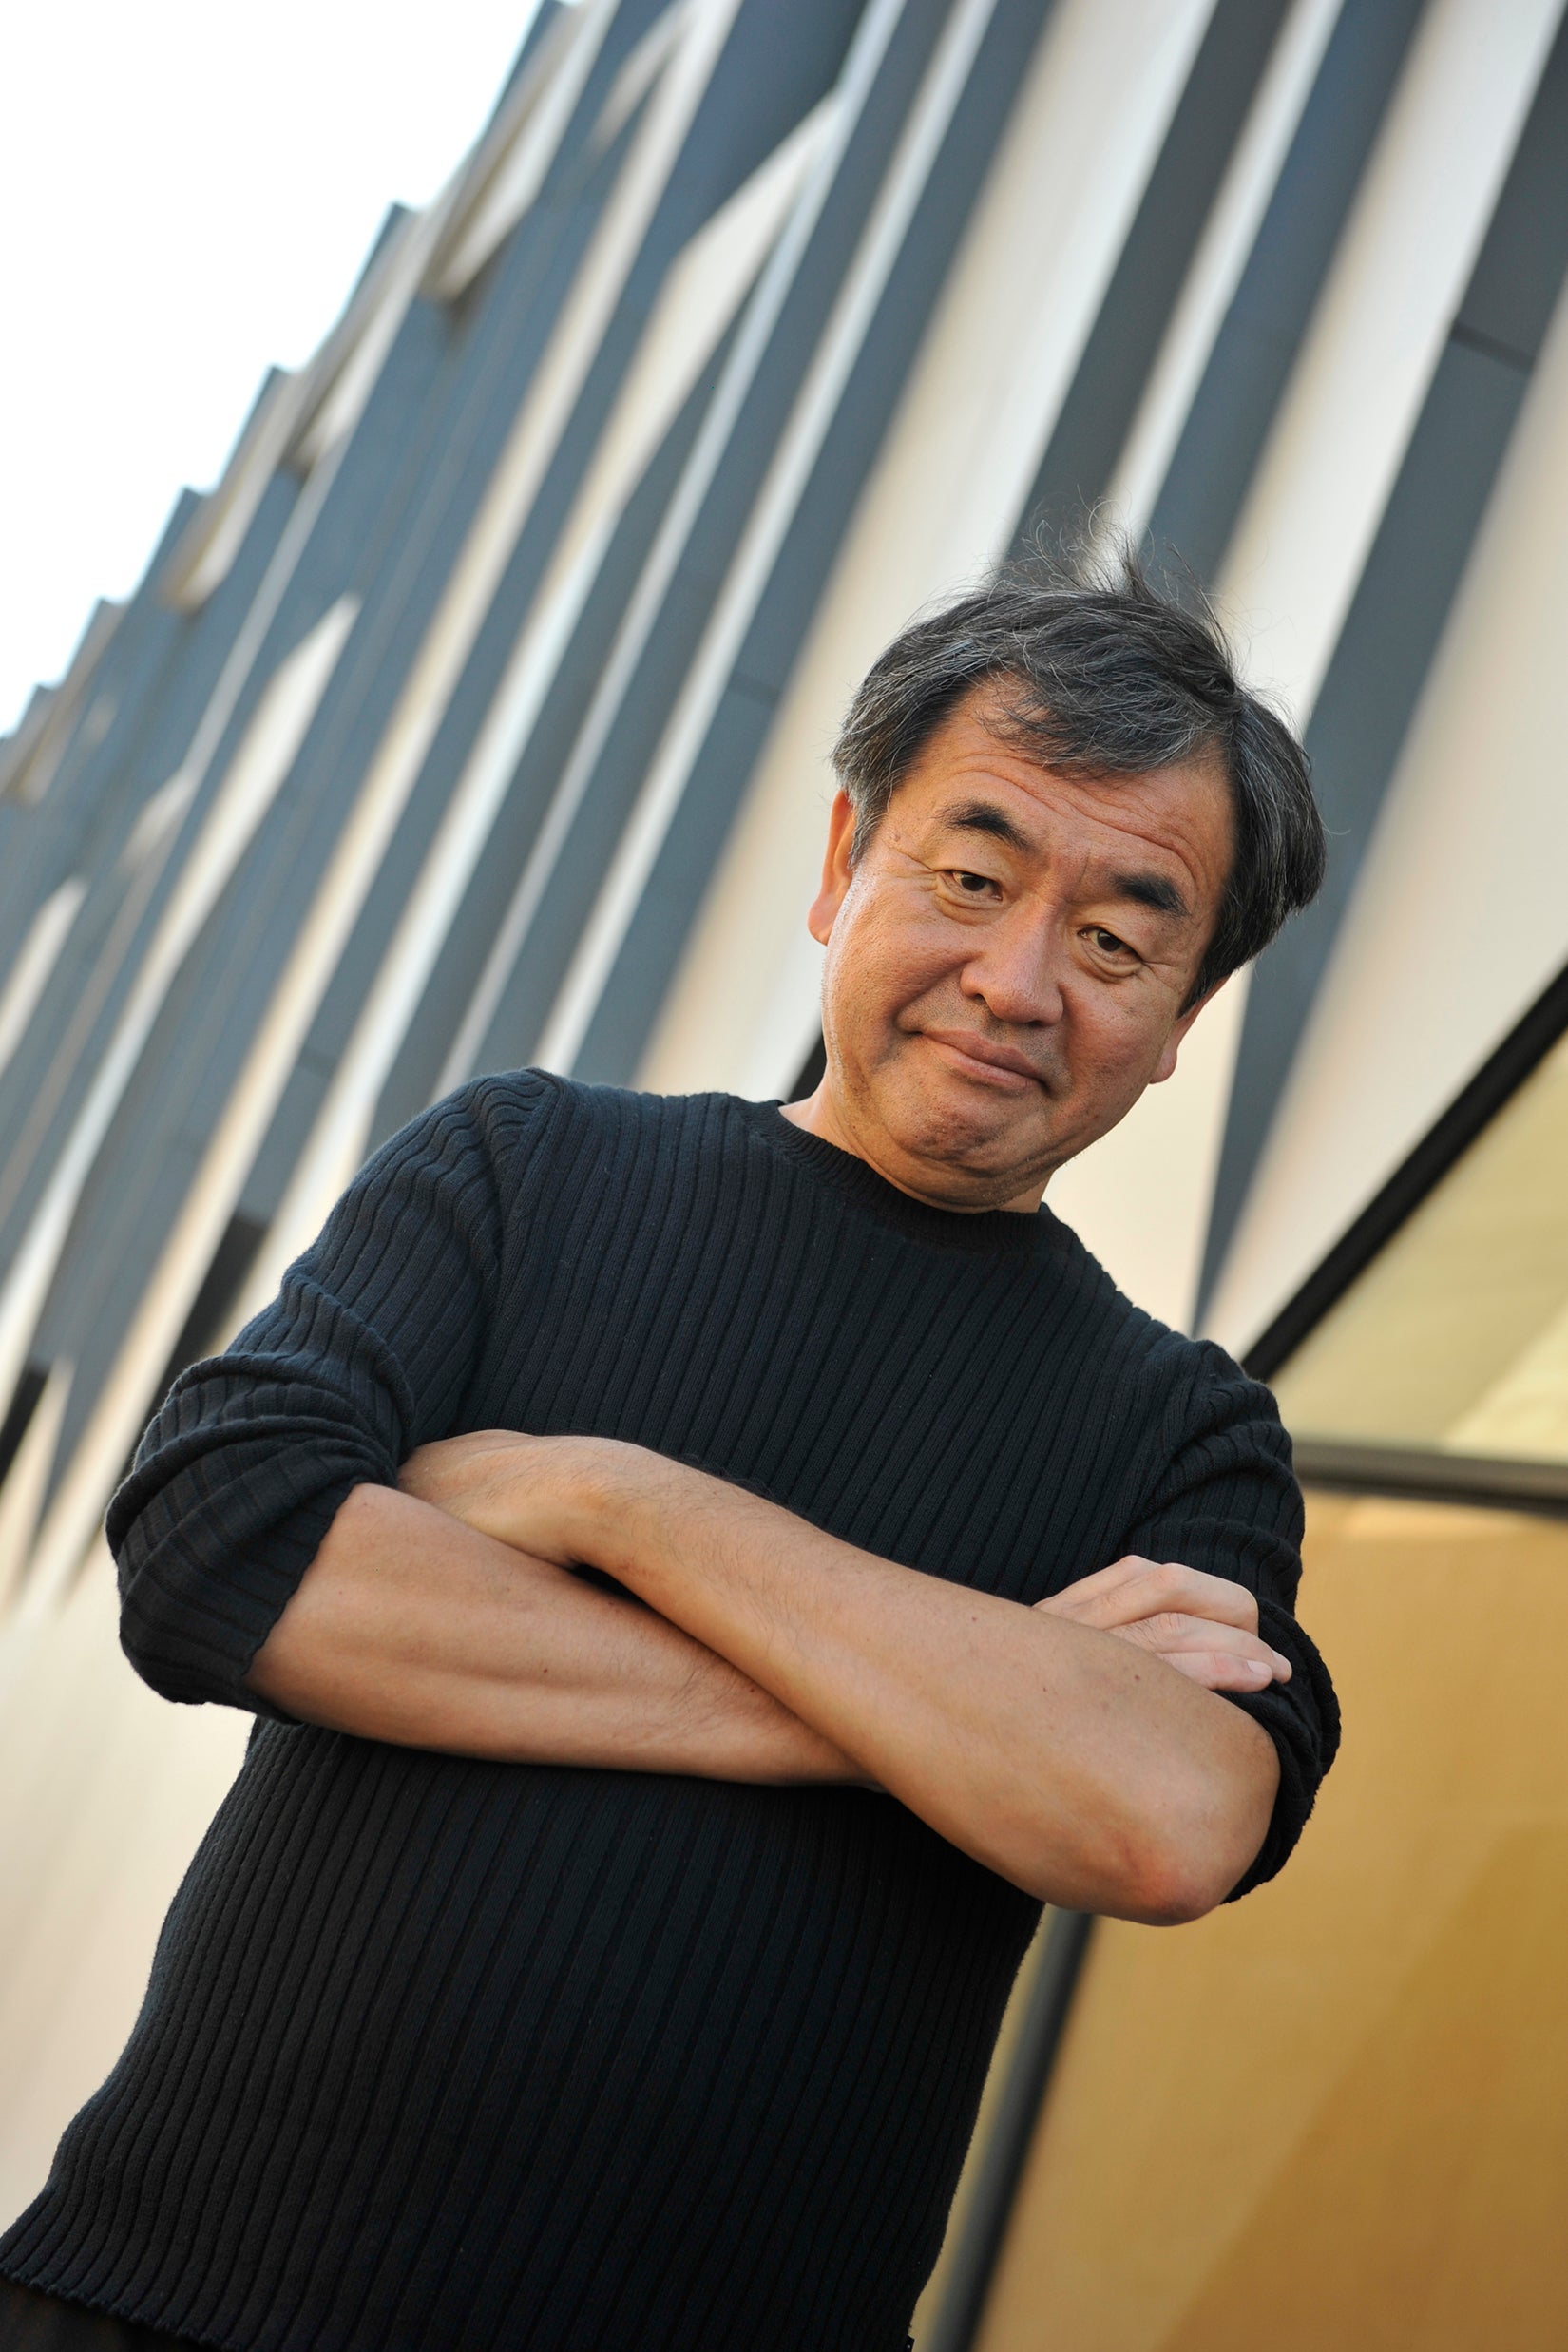 A portrait of Kengo Kuma, standing with his arms crossed and wearing a black shirt.